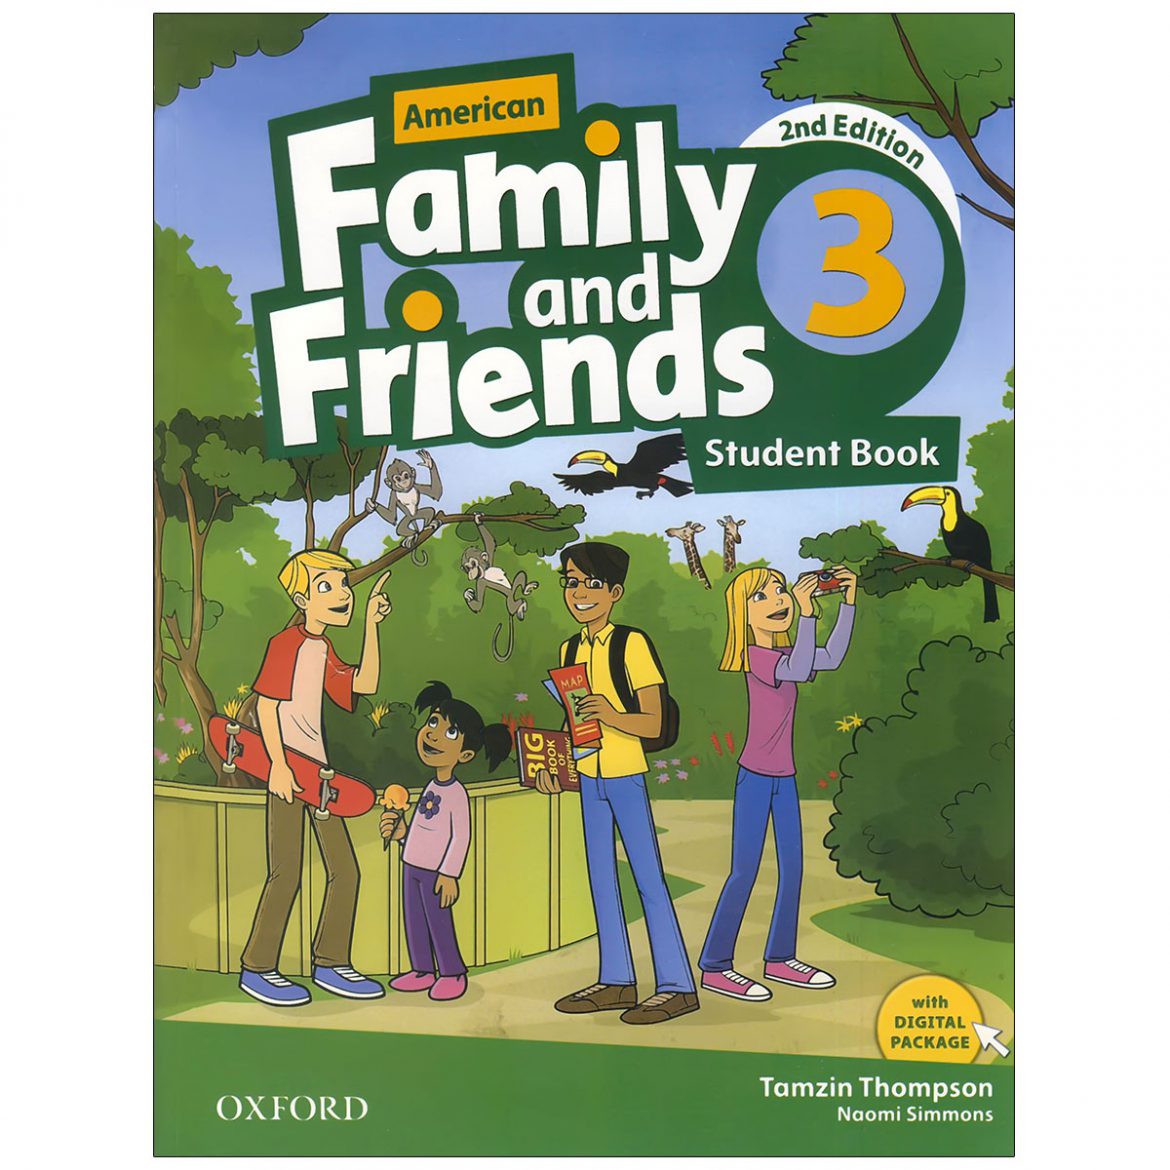 Friends 3.3. Family and friends 2 Edition Classbook. 2nd Edition Family friends Workbook Oxford Naomi Simmons. Oxford Family and friends 3. Family and friends 3 class book.